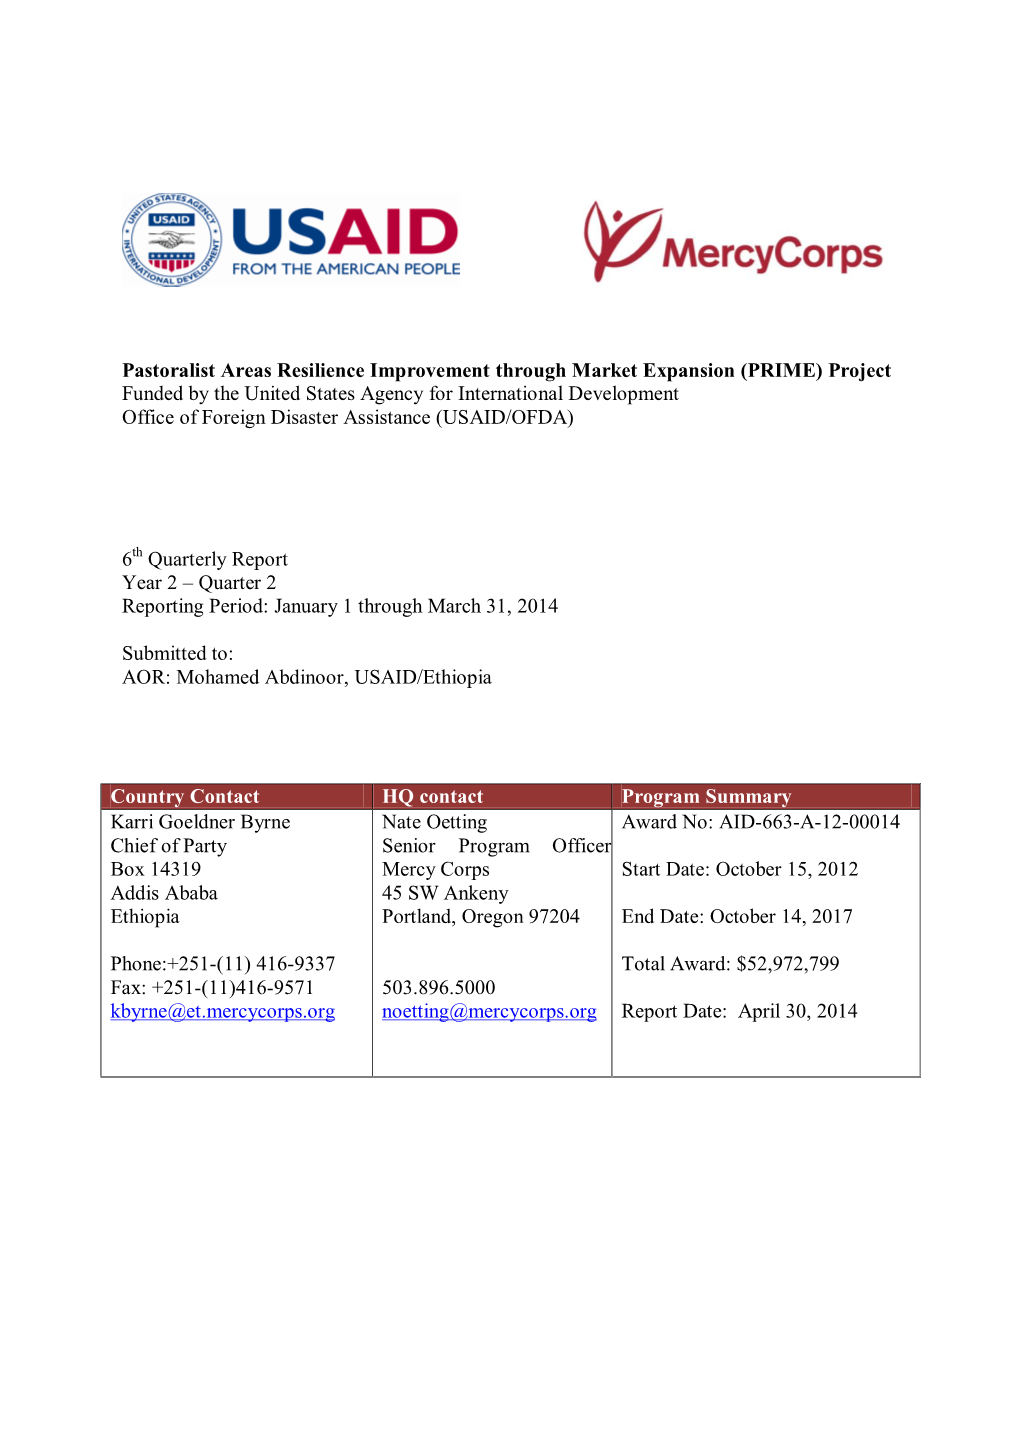 PRIME) Project Funded by the United States Agency for International Development Office of Foreign Disaster Assistance (USAID/OFDA